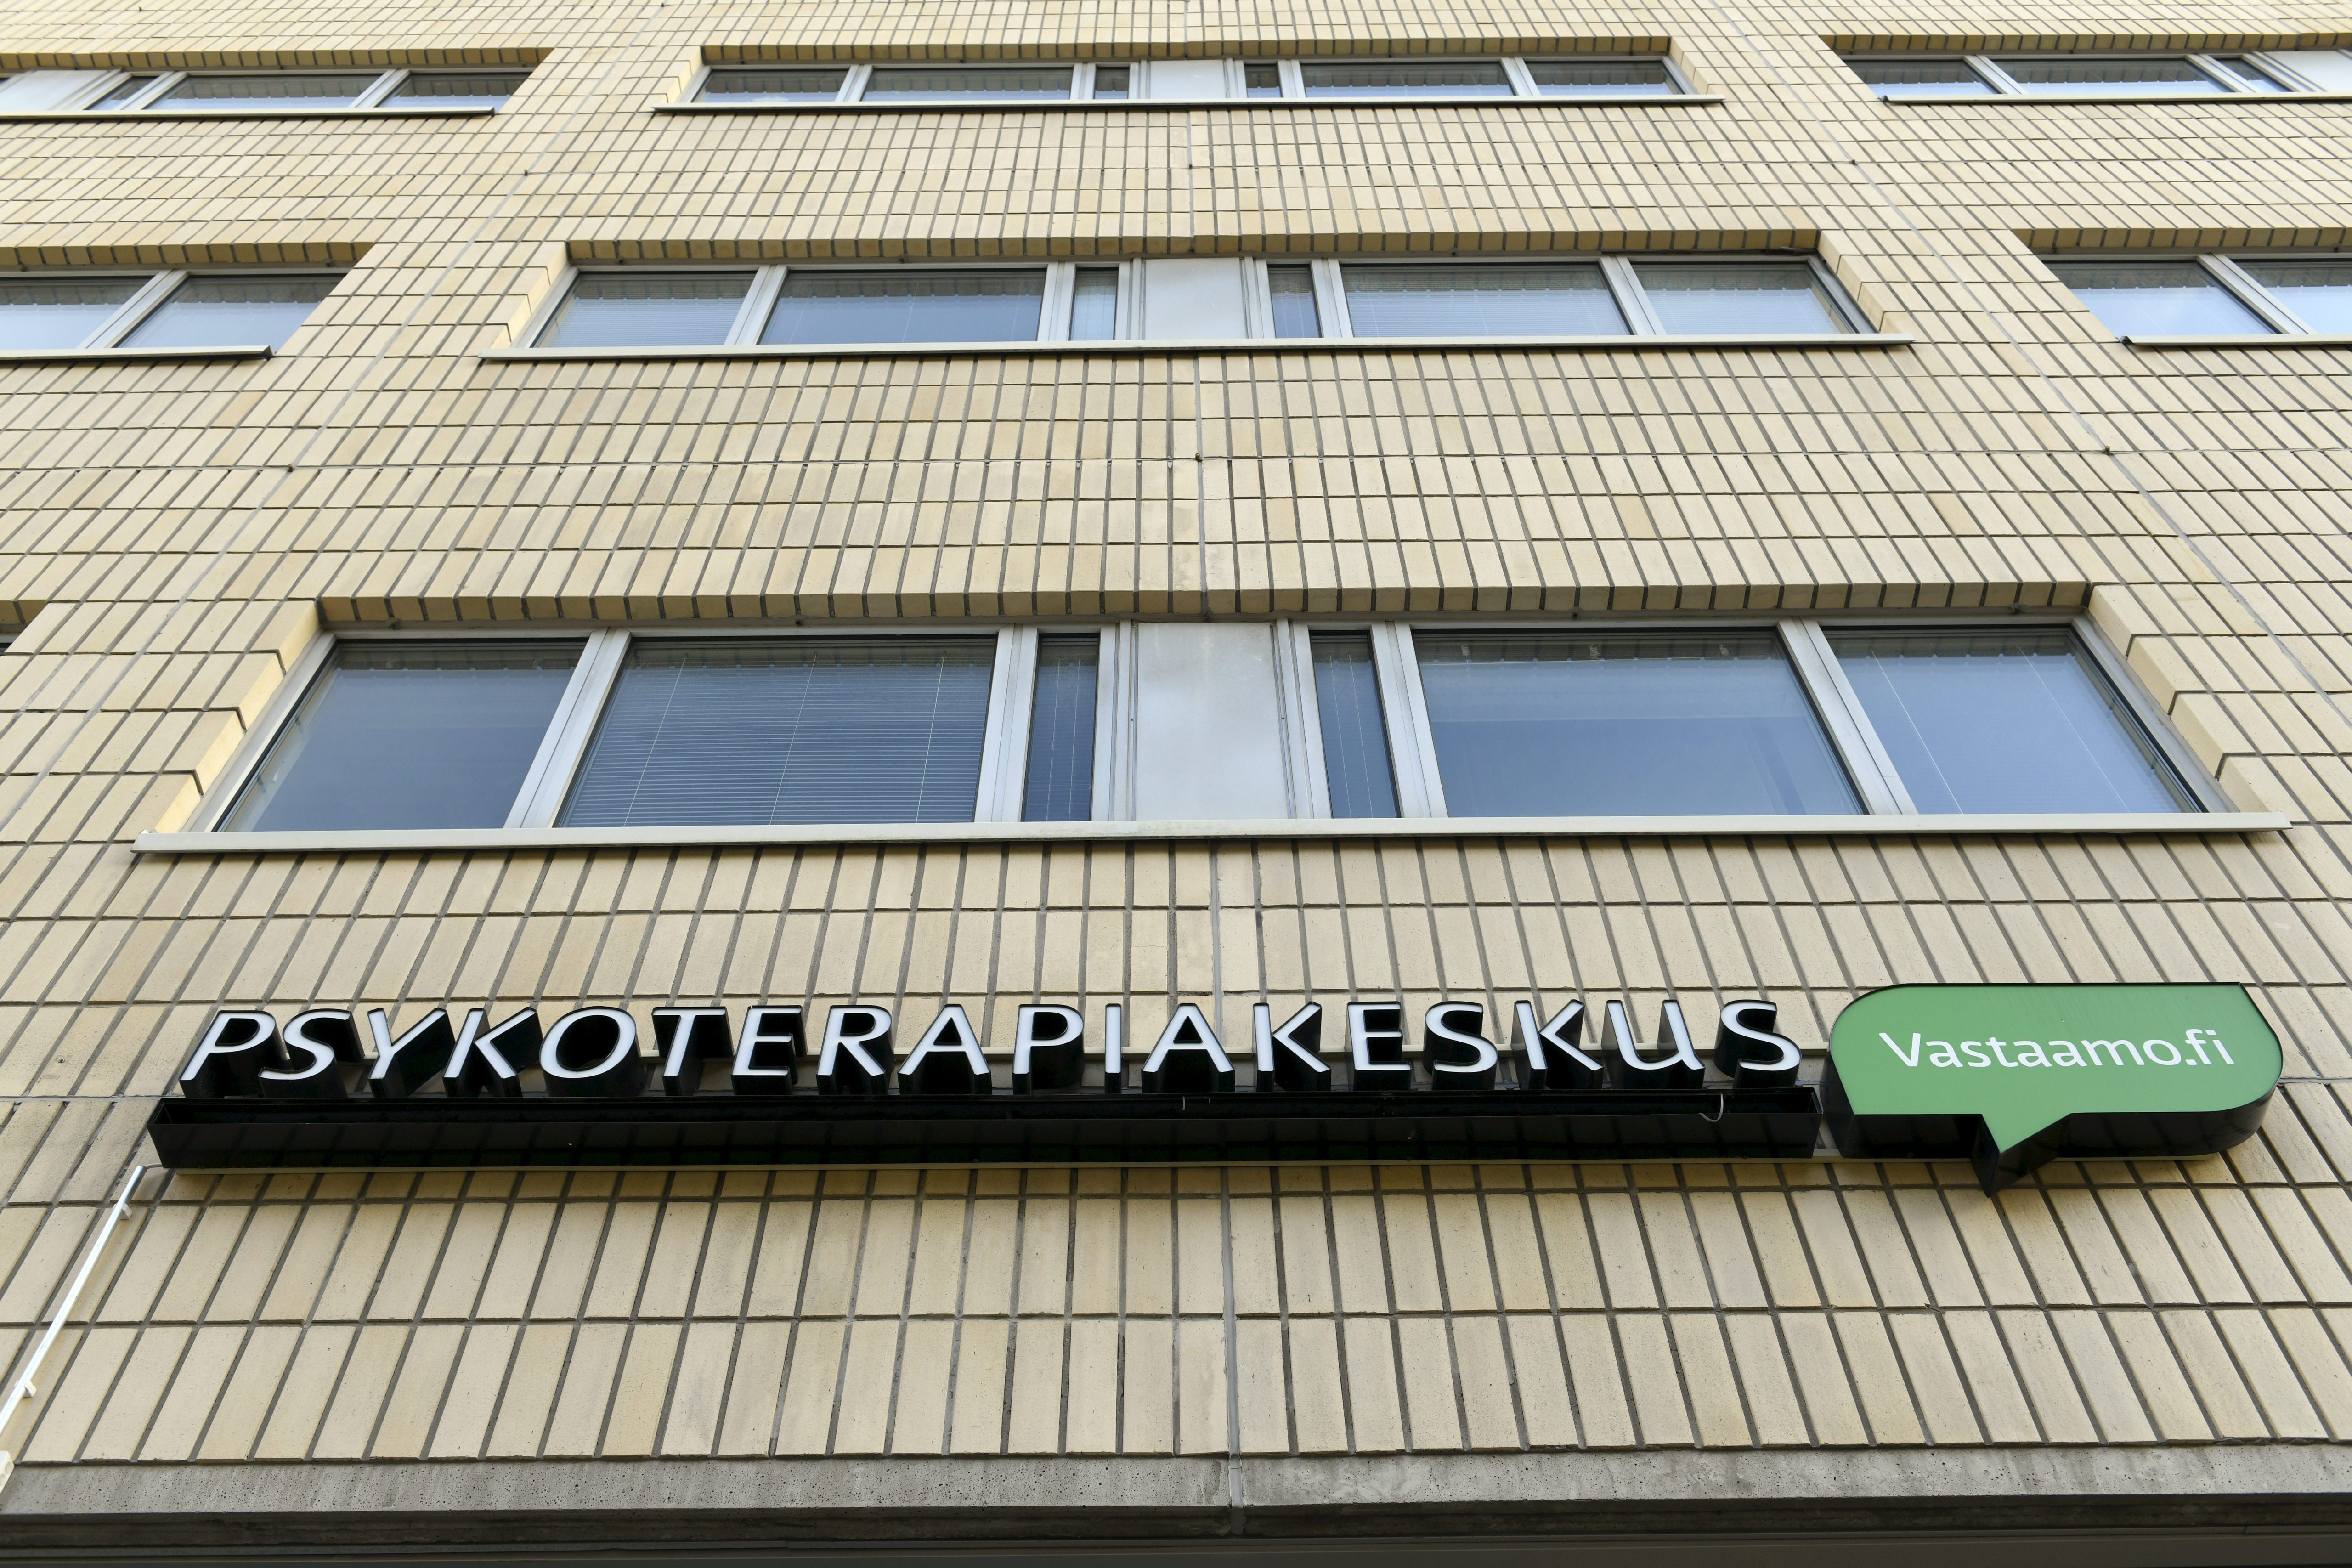 Finnish hacker imprisoned for accessing thousands of psychotherapy records and demanding ransoms